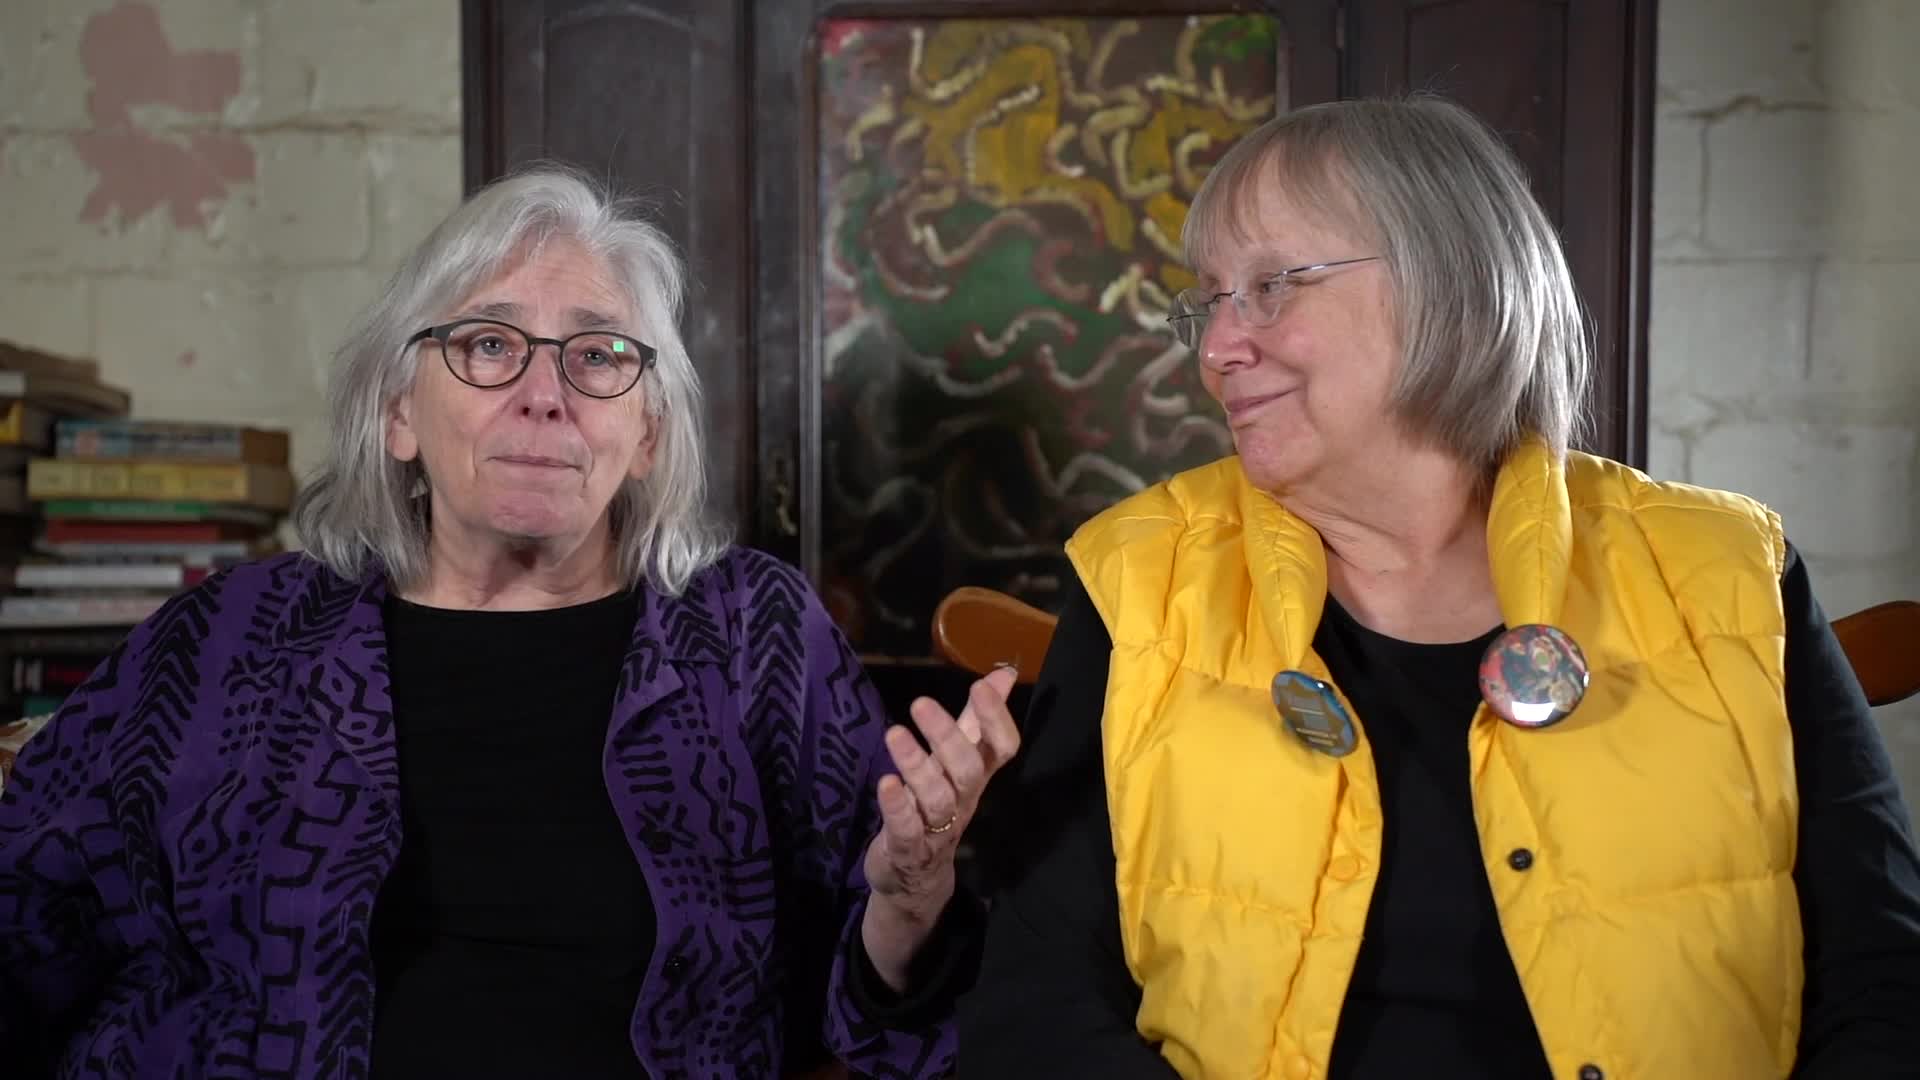 Cathy Fink and Marcy Marxer Interview, December 01, 2022